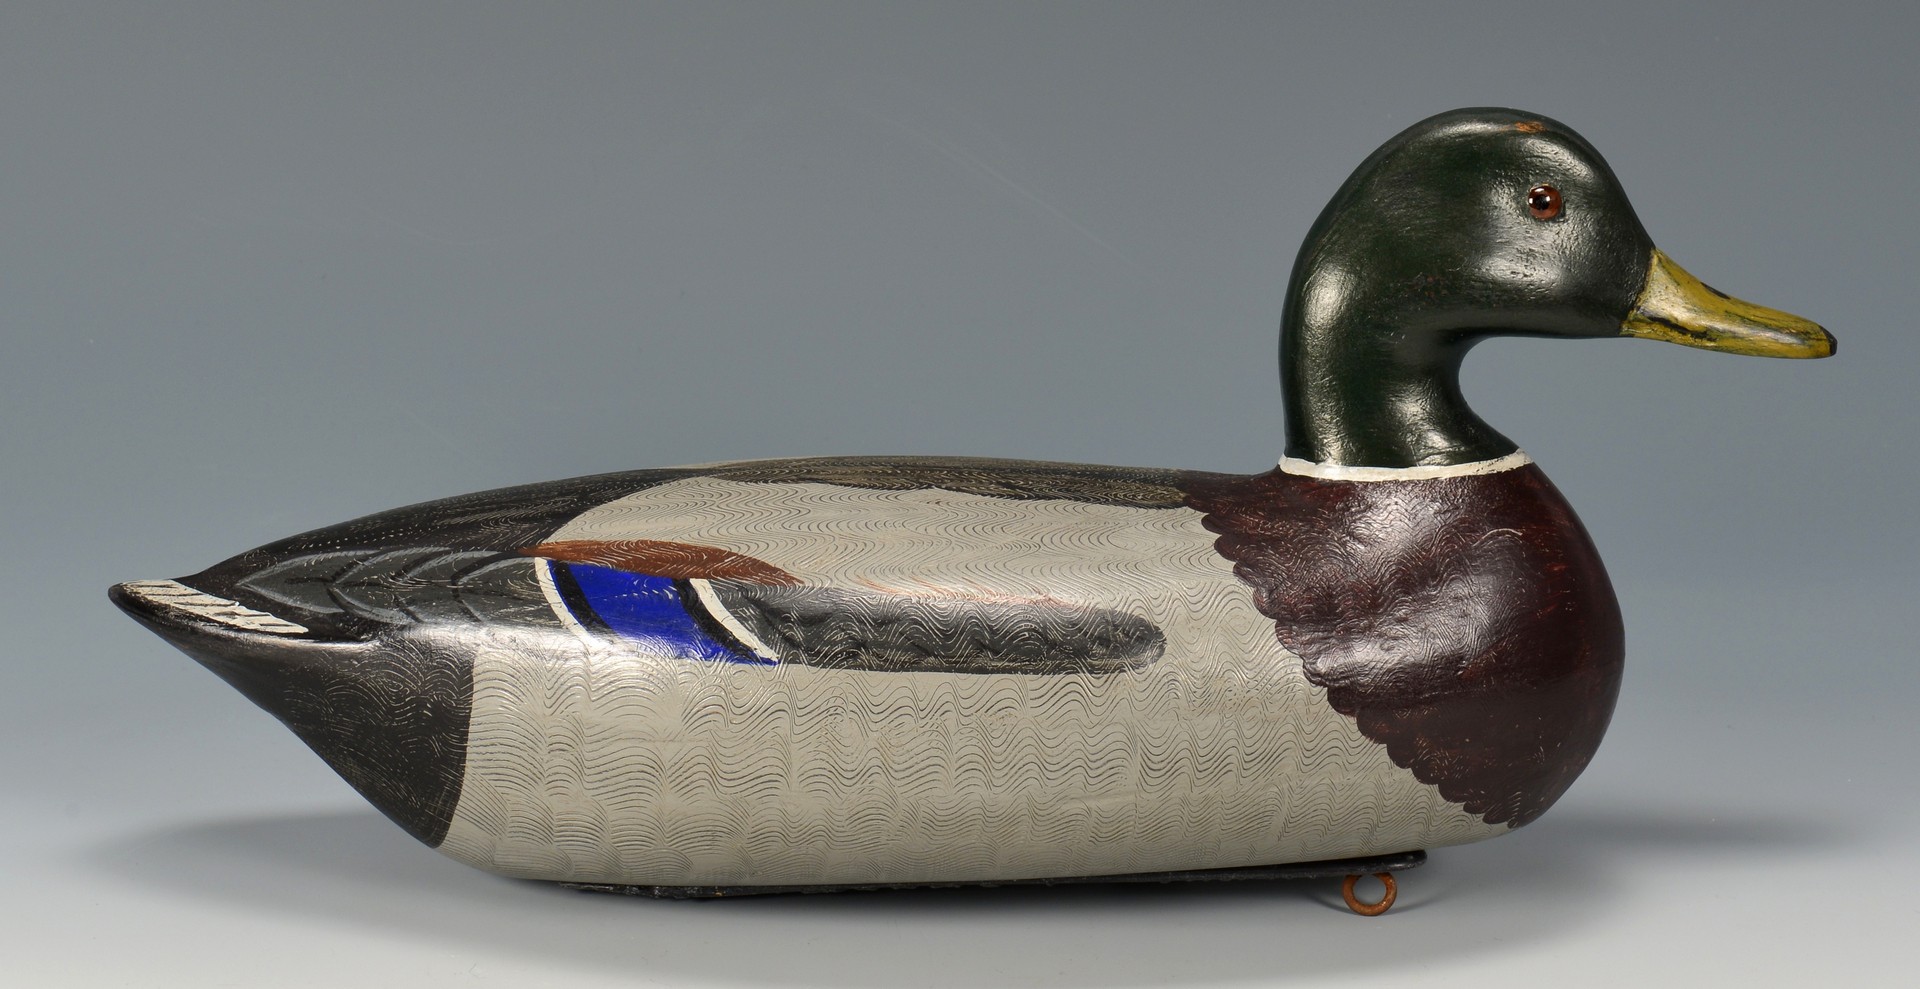 Lot 279: 4 Carved & Painted Duck Decoys, 2 signed